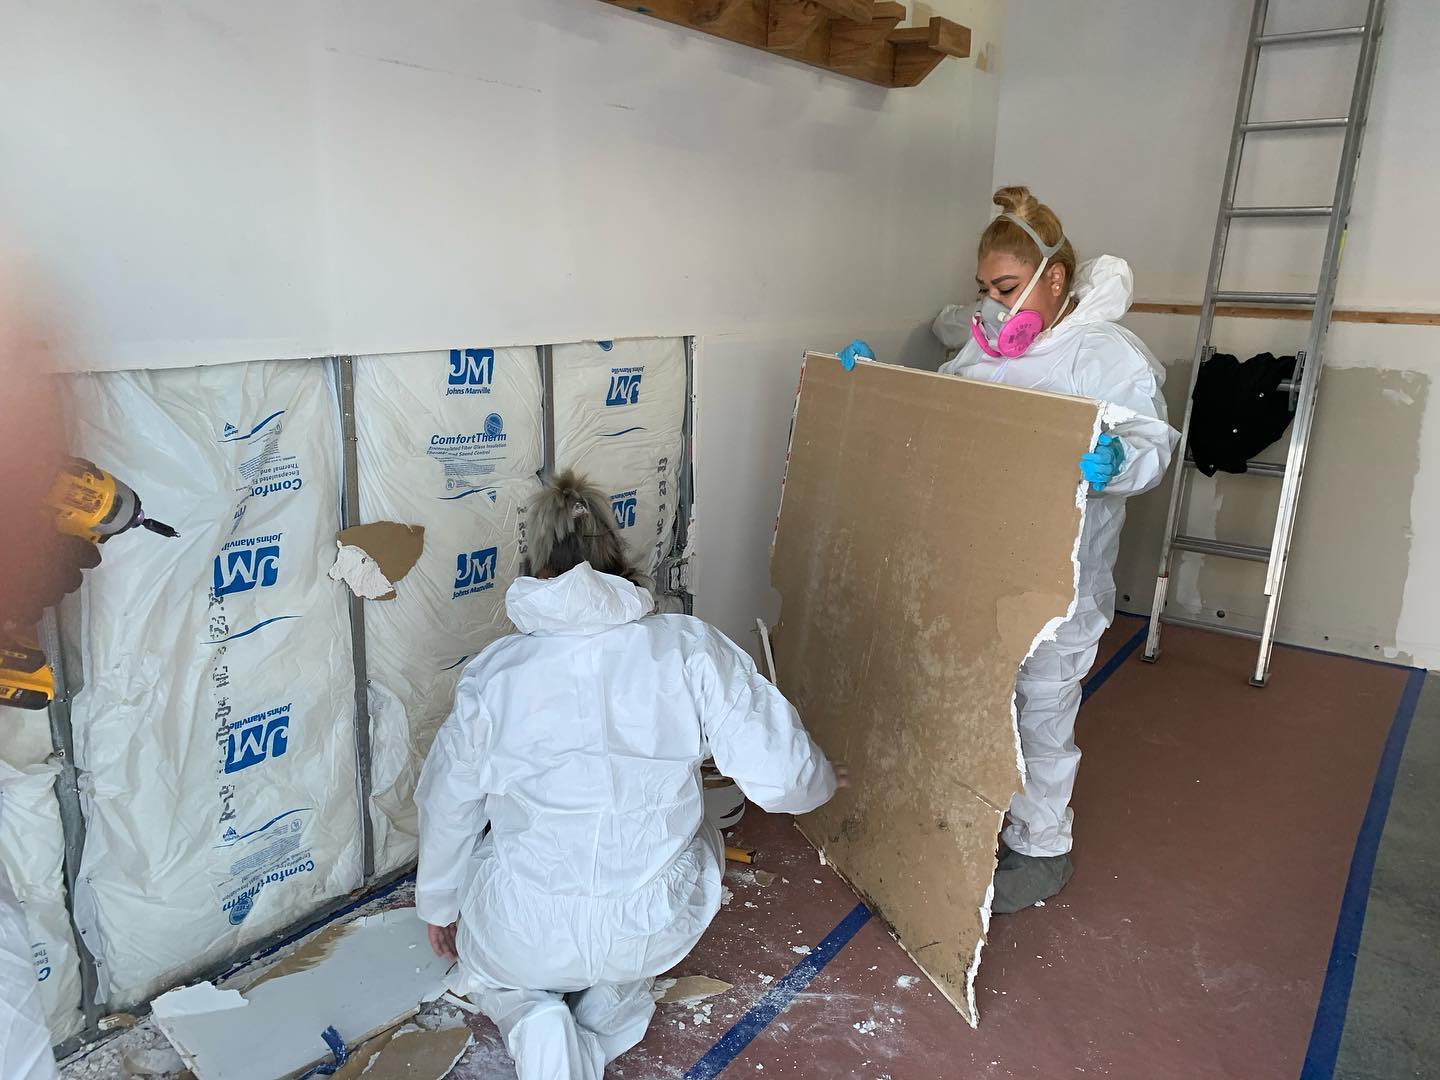 Two people in protective suits and masks removing old insulation from a wall in a room under renovation.